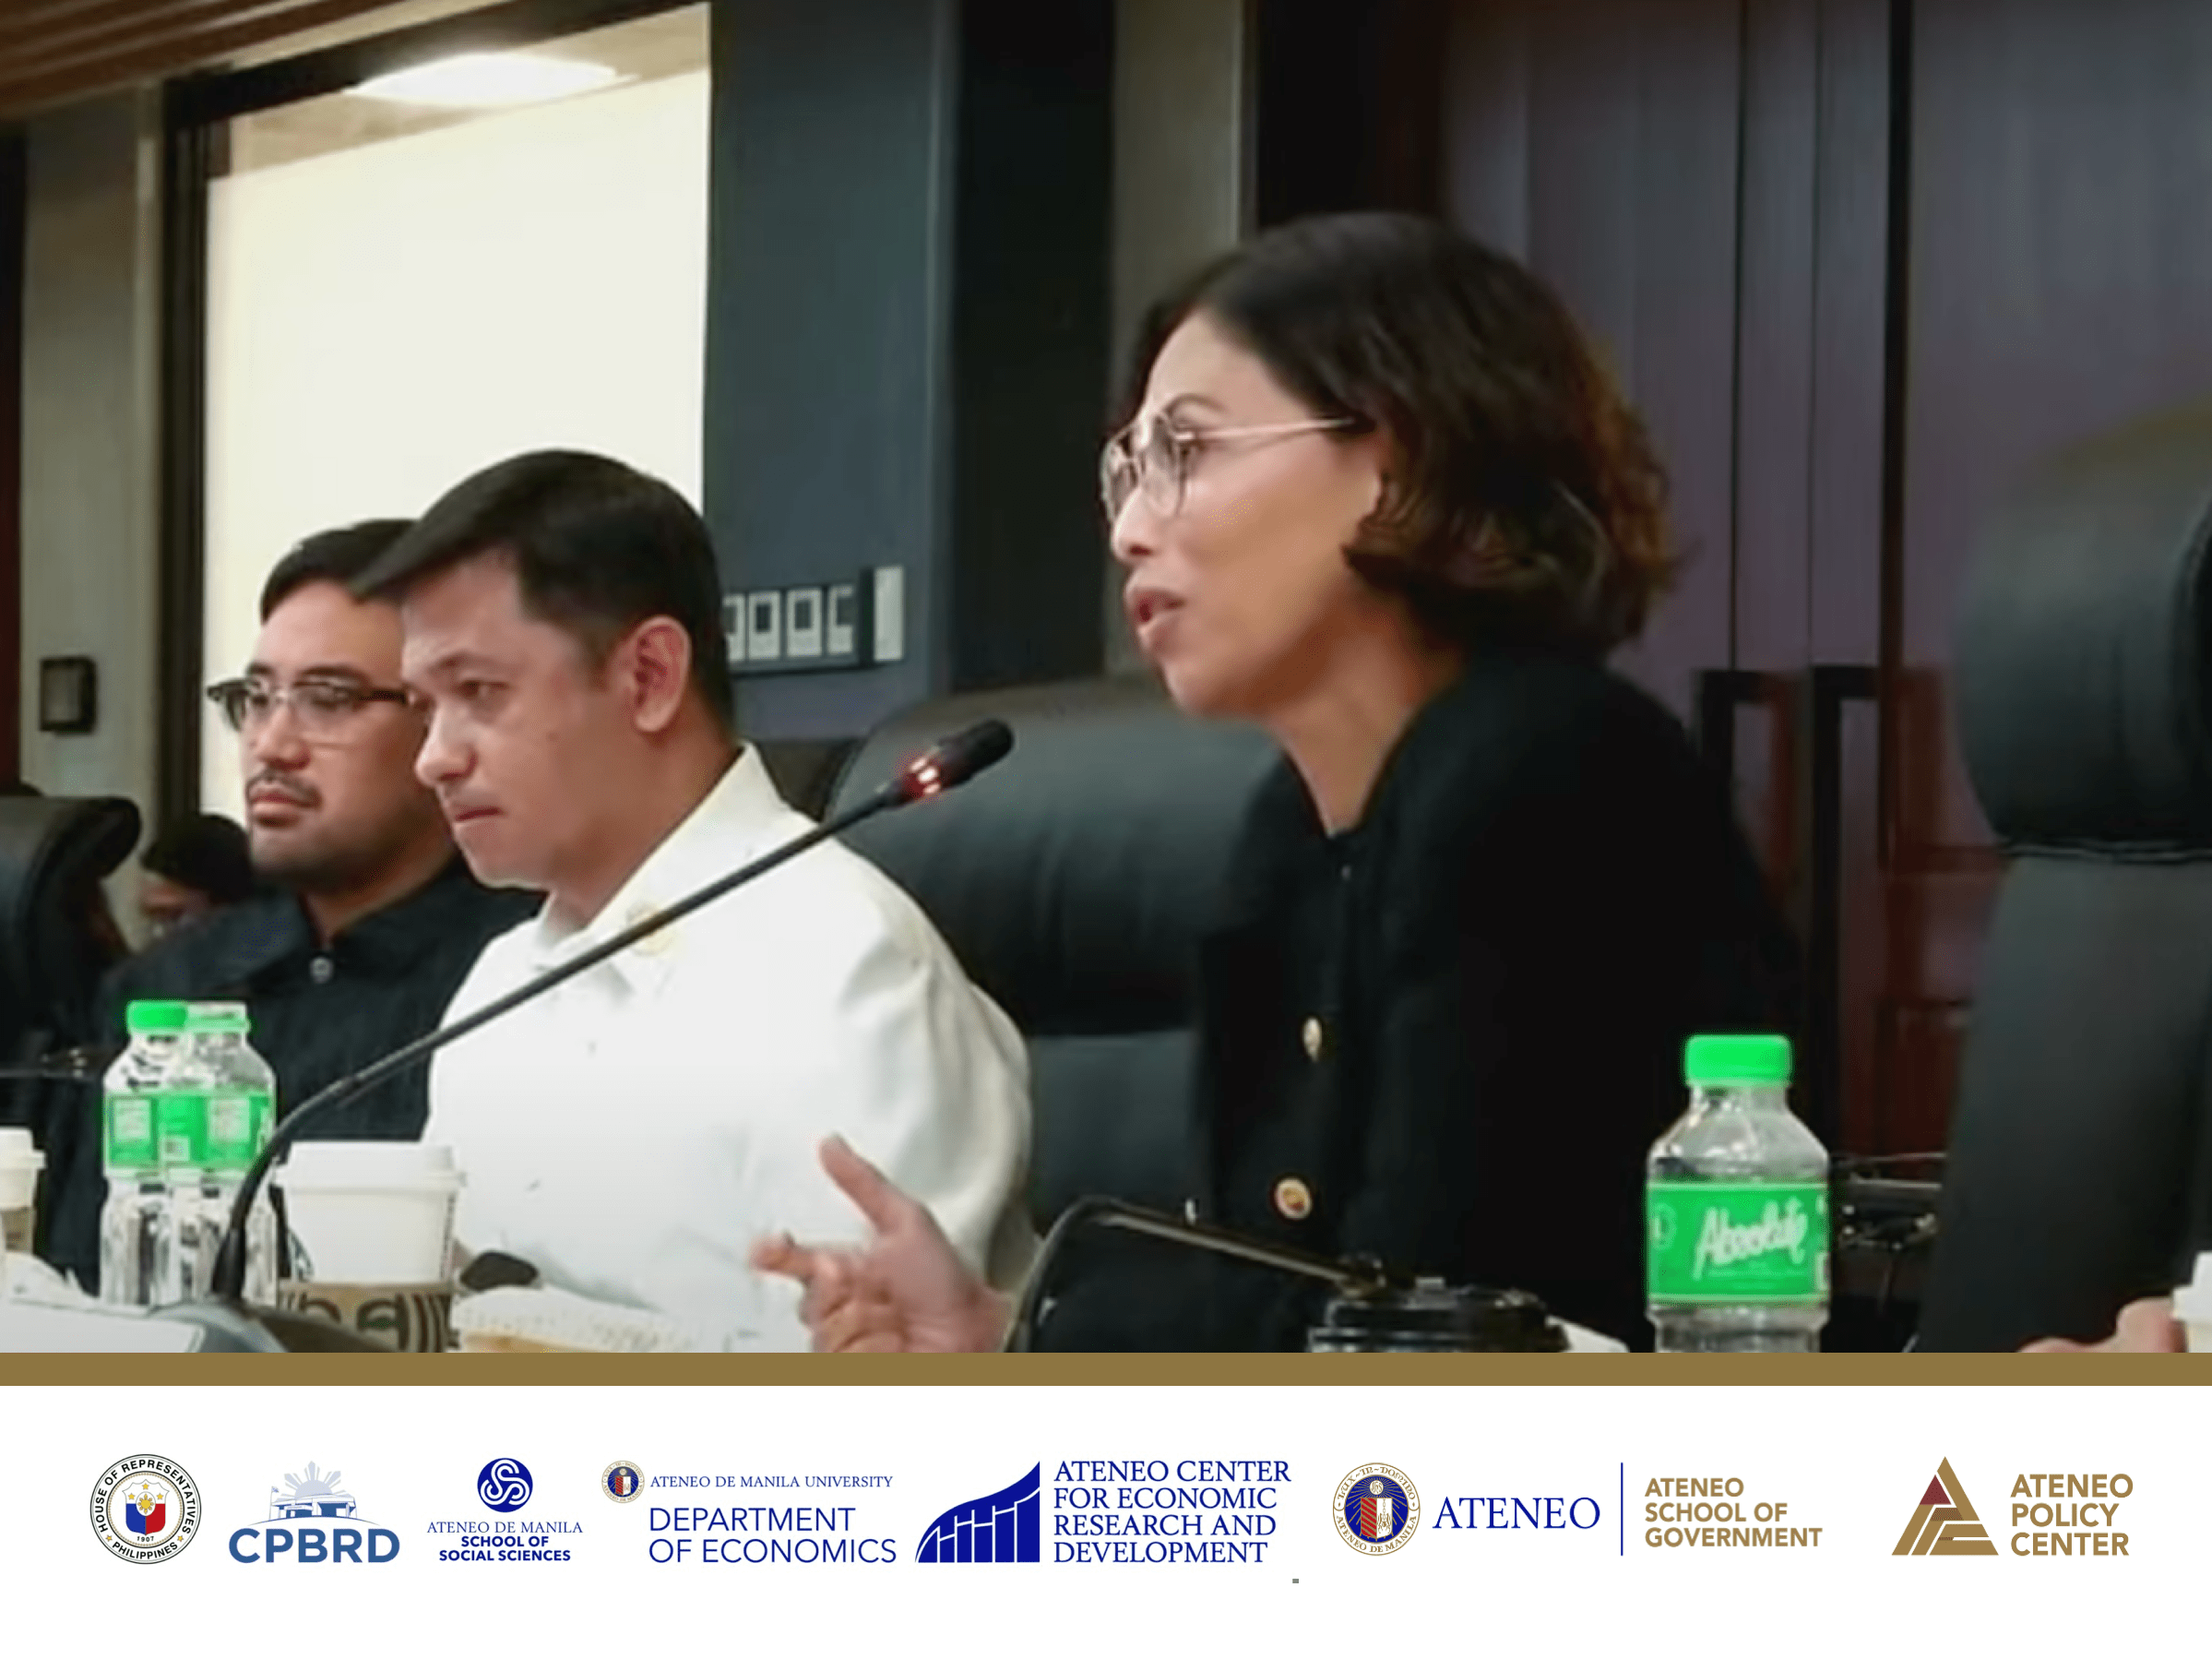 In this photo: [Right to left] Hon. Christopher Devencia, Hon. Jemie Jett Nisay, and Hon. Stella Quimbo